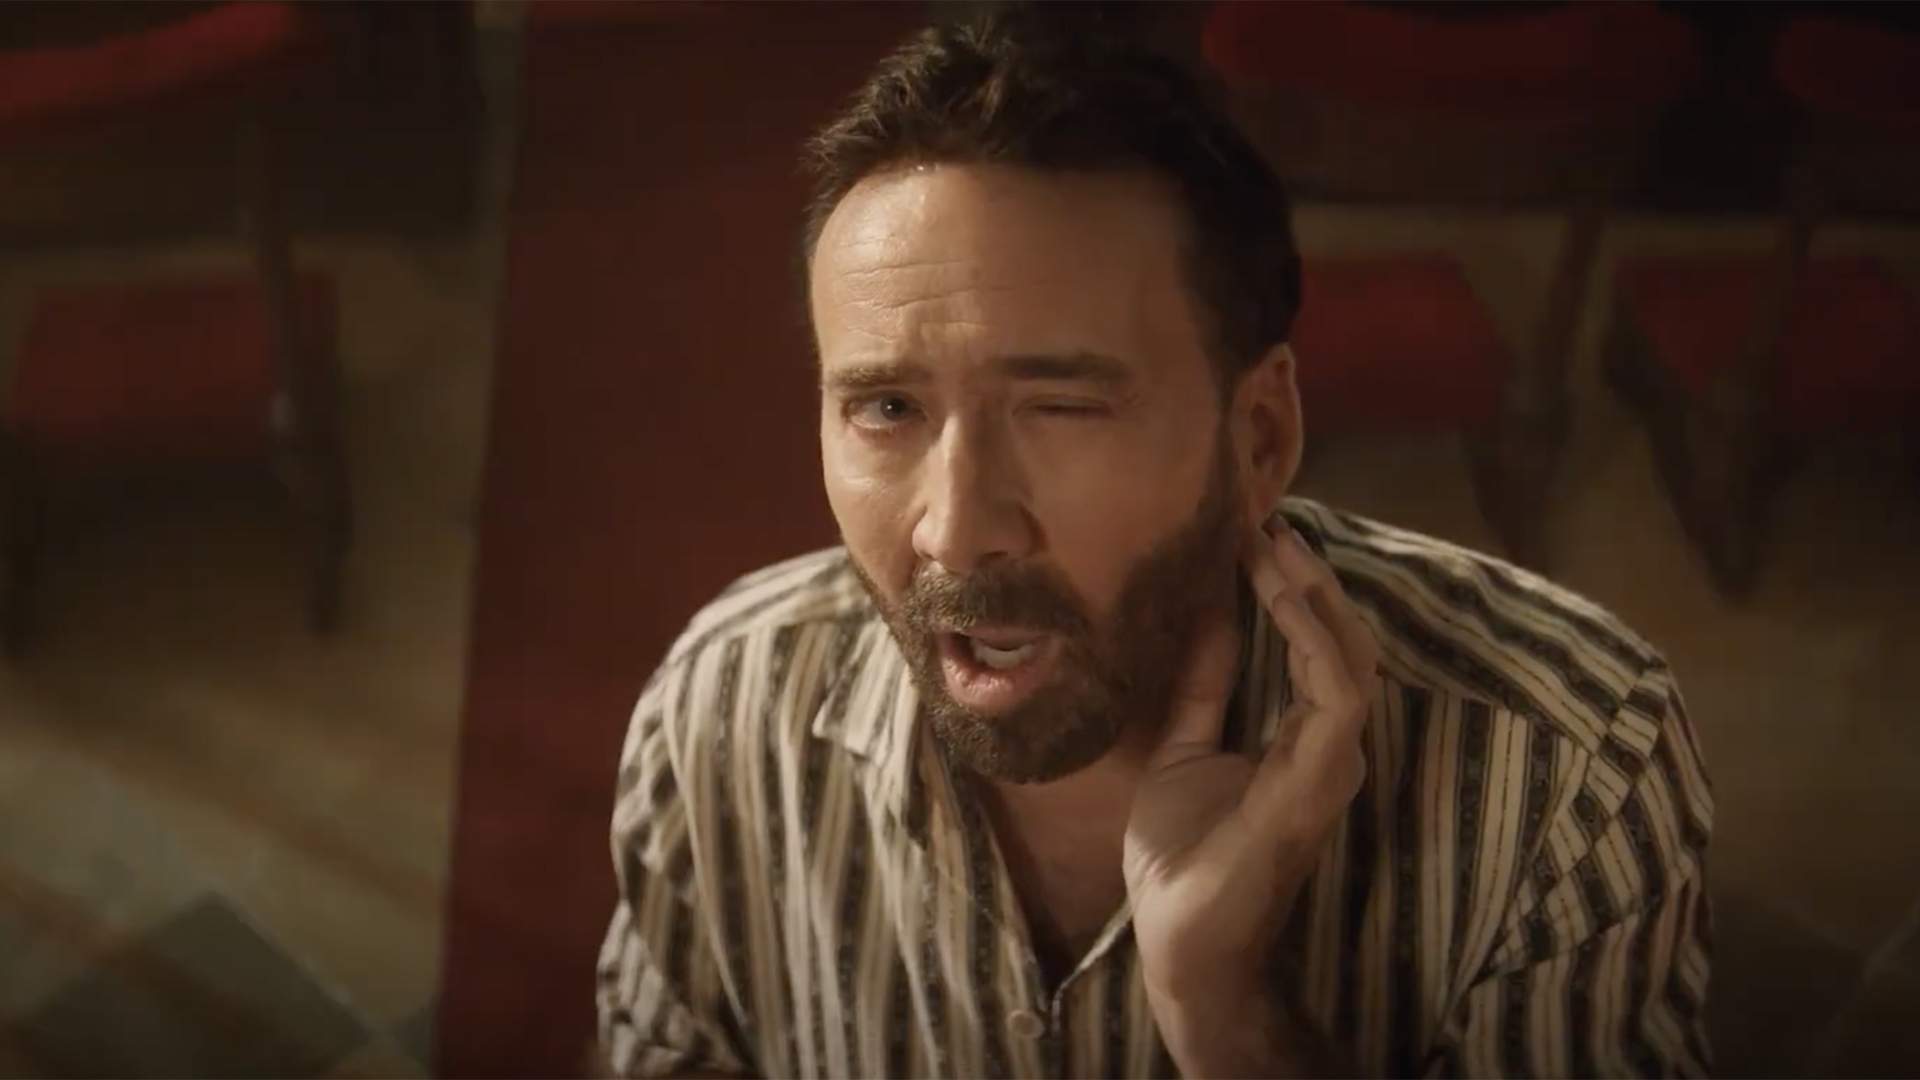 Nicolas Cage Plays (and Parodies) Himself in the Trailer for 'The Unbearable Weight of Massive Talent'